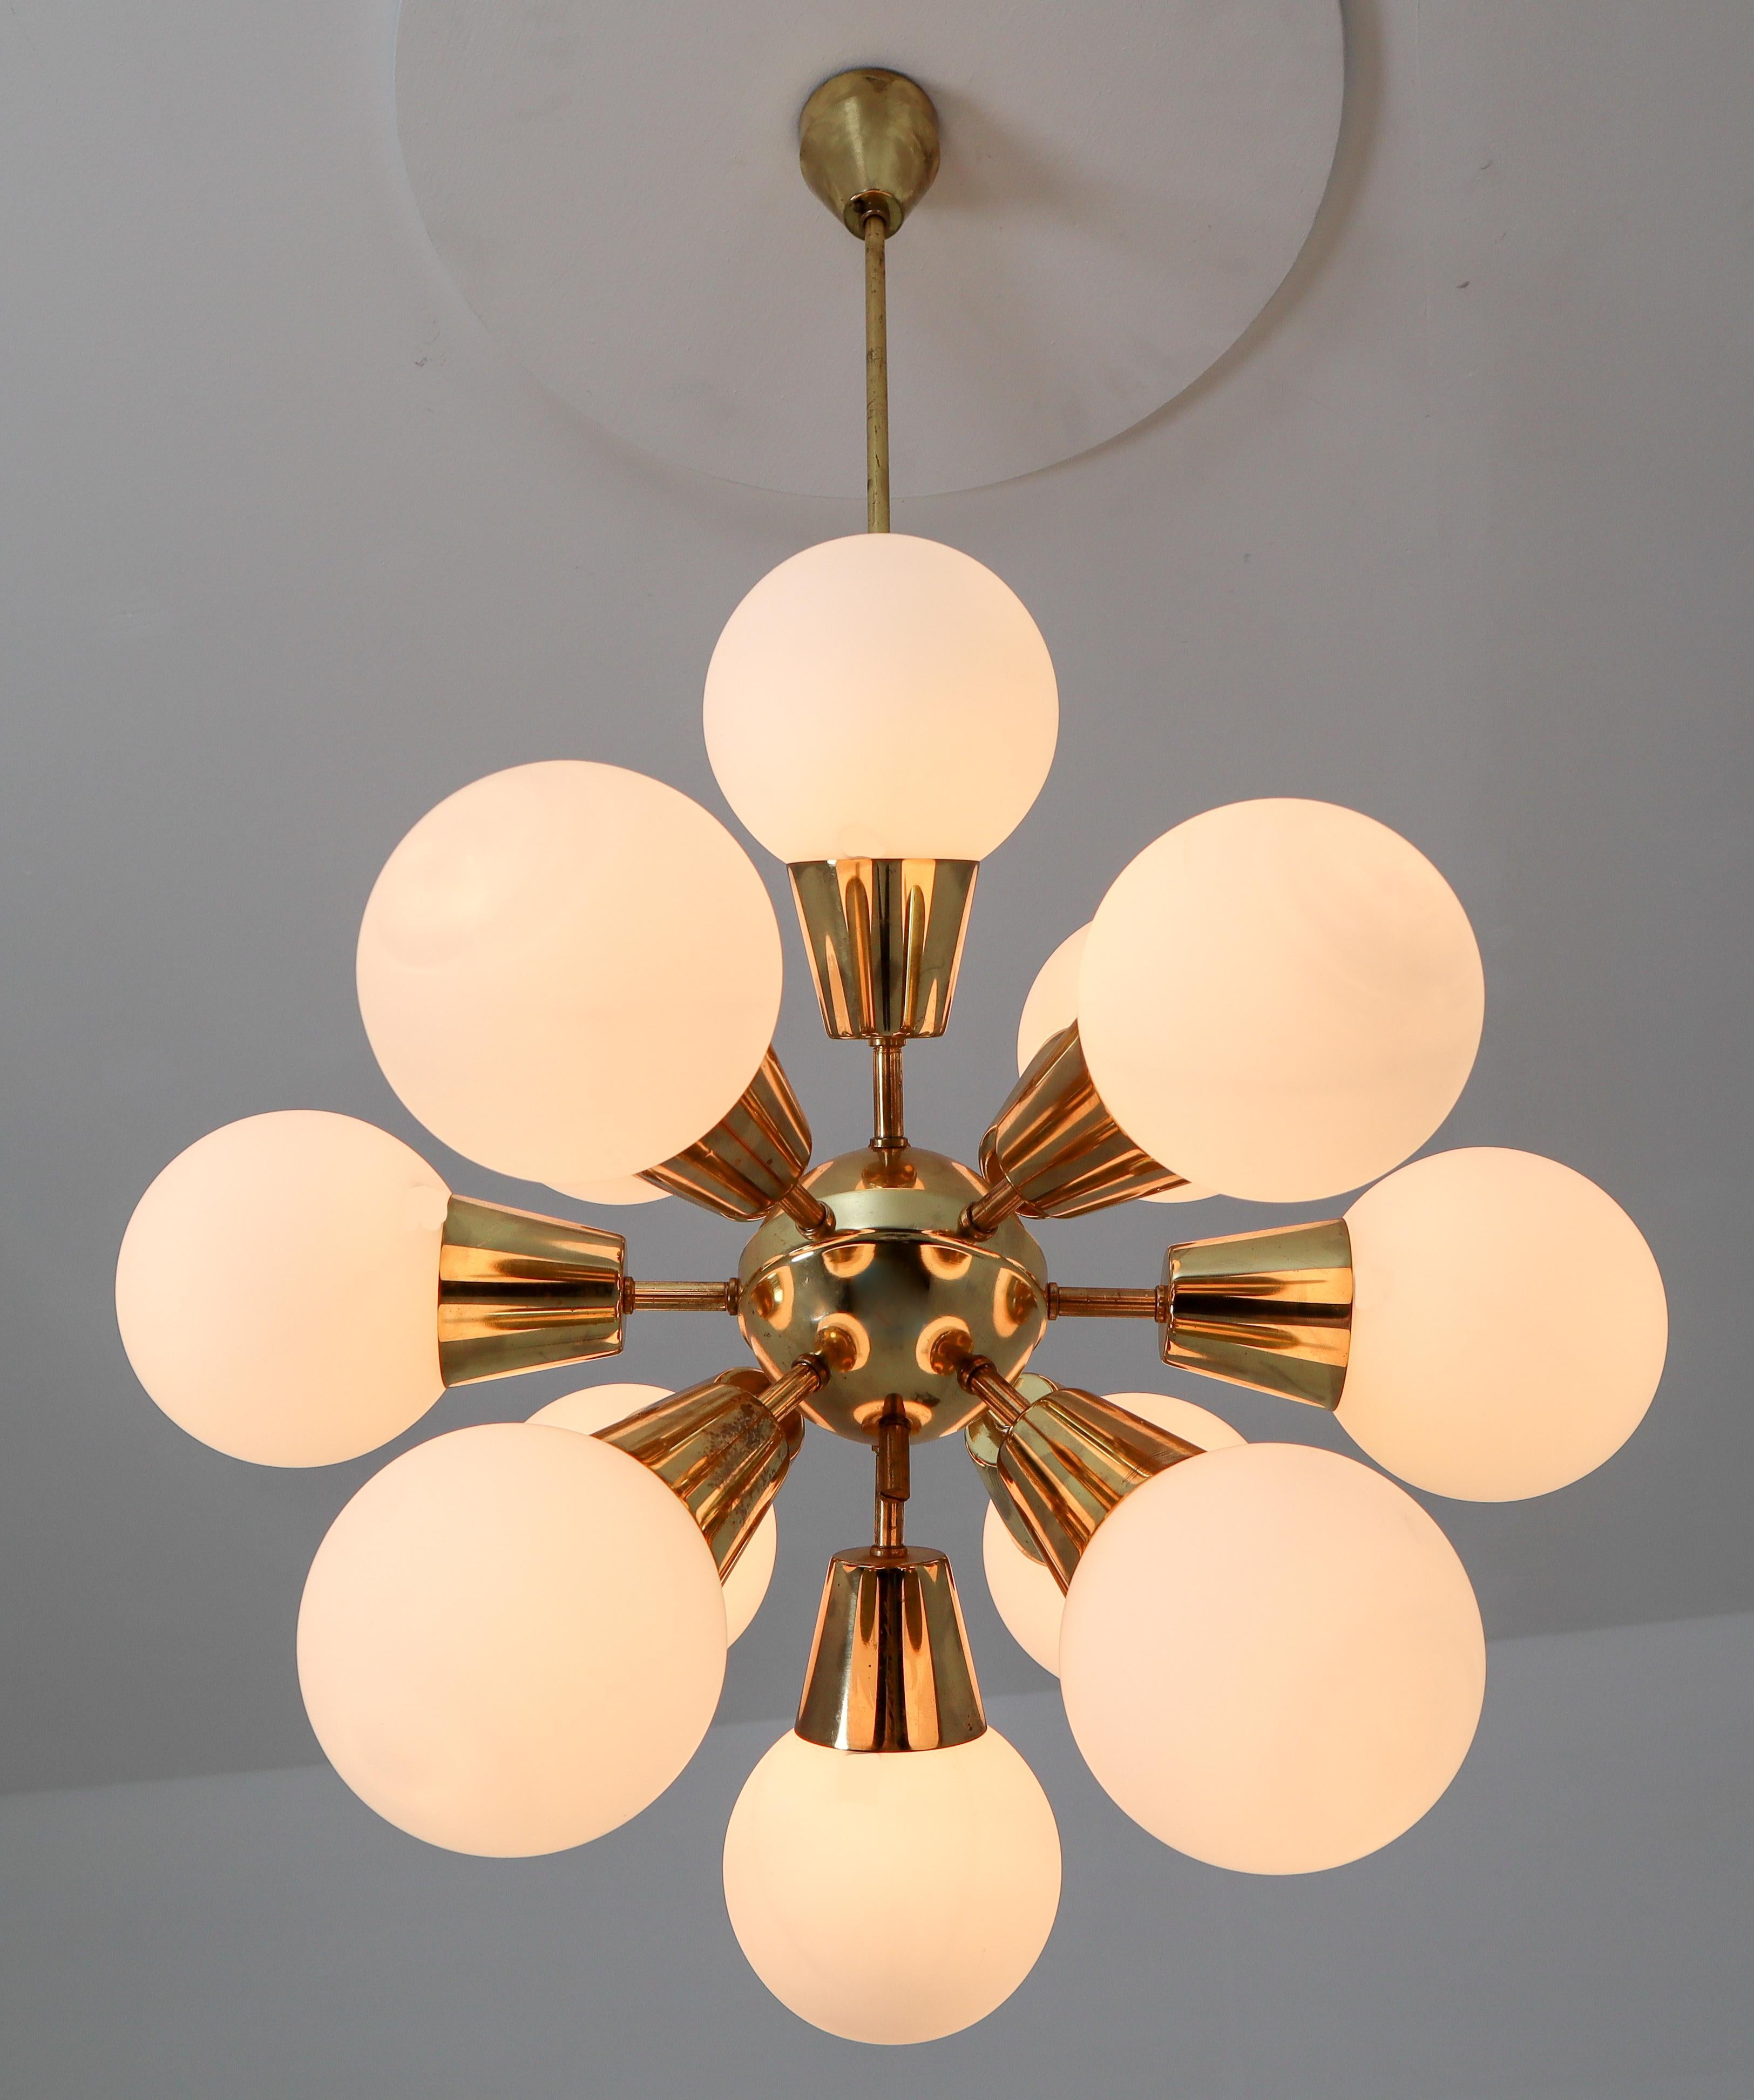 Sputnik chandeliers with brass fixture and opaline spheres. These chandeliers with brass frame consist of twelve lights. The diffuse light it spreads is very atmospheric. Completed with the opaline glass and brass details, these chandeliers will